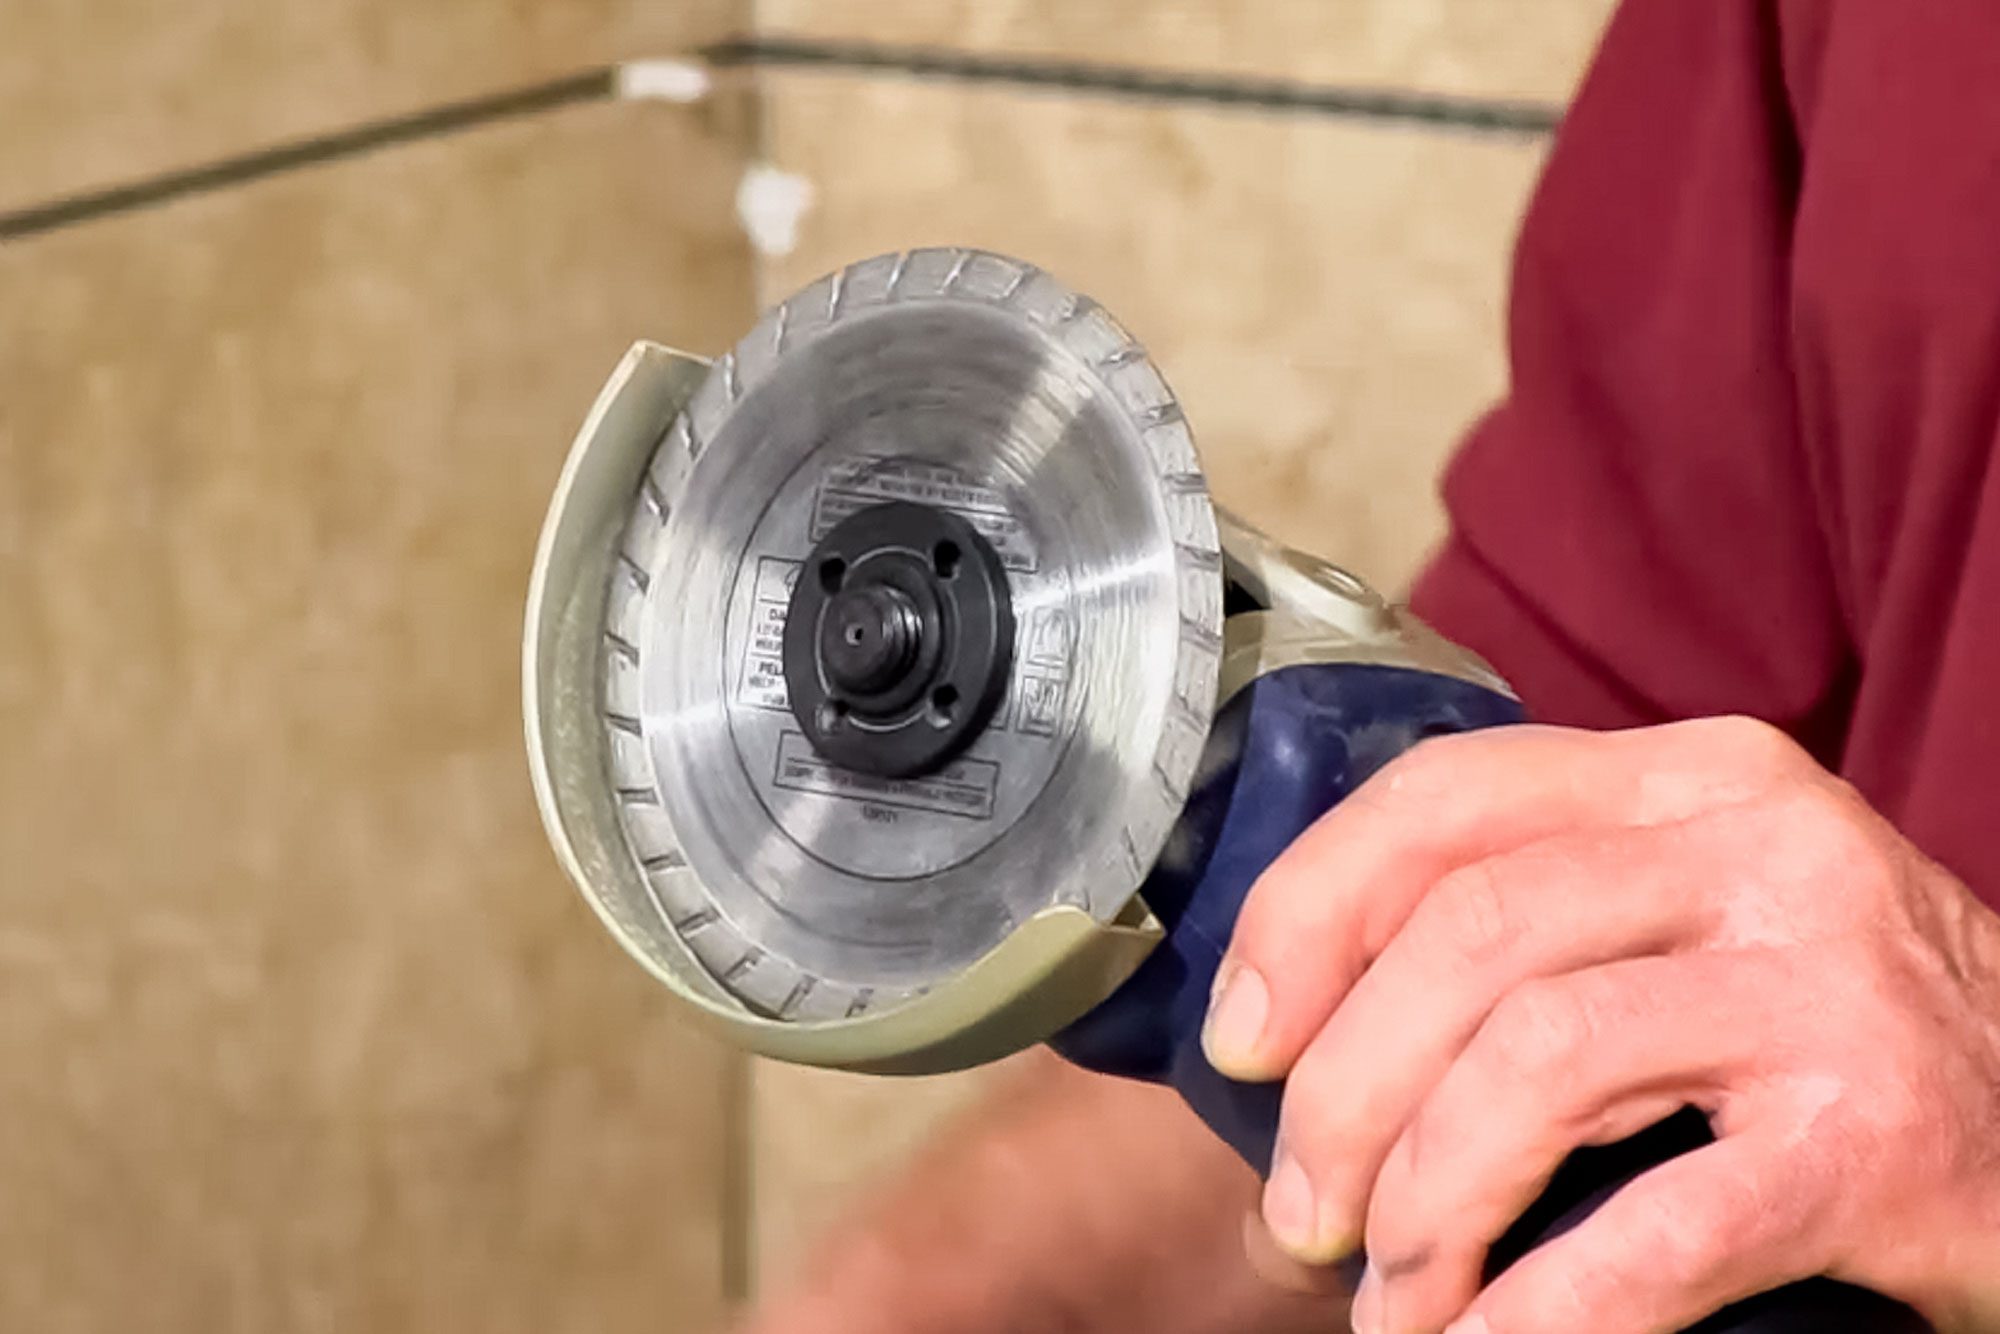 How To Cut Tile With a Grinder